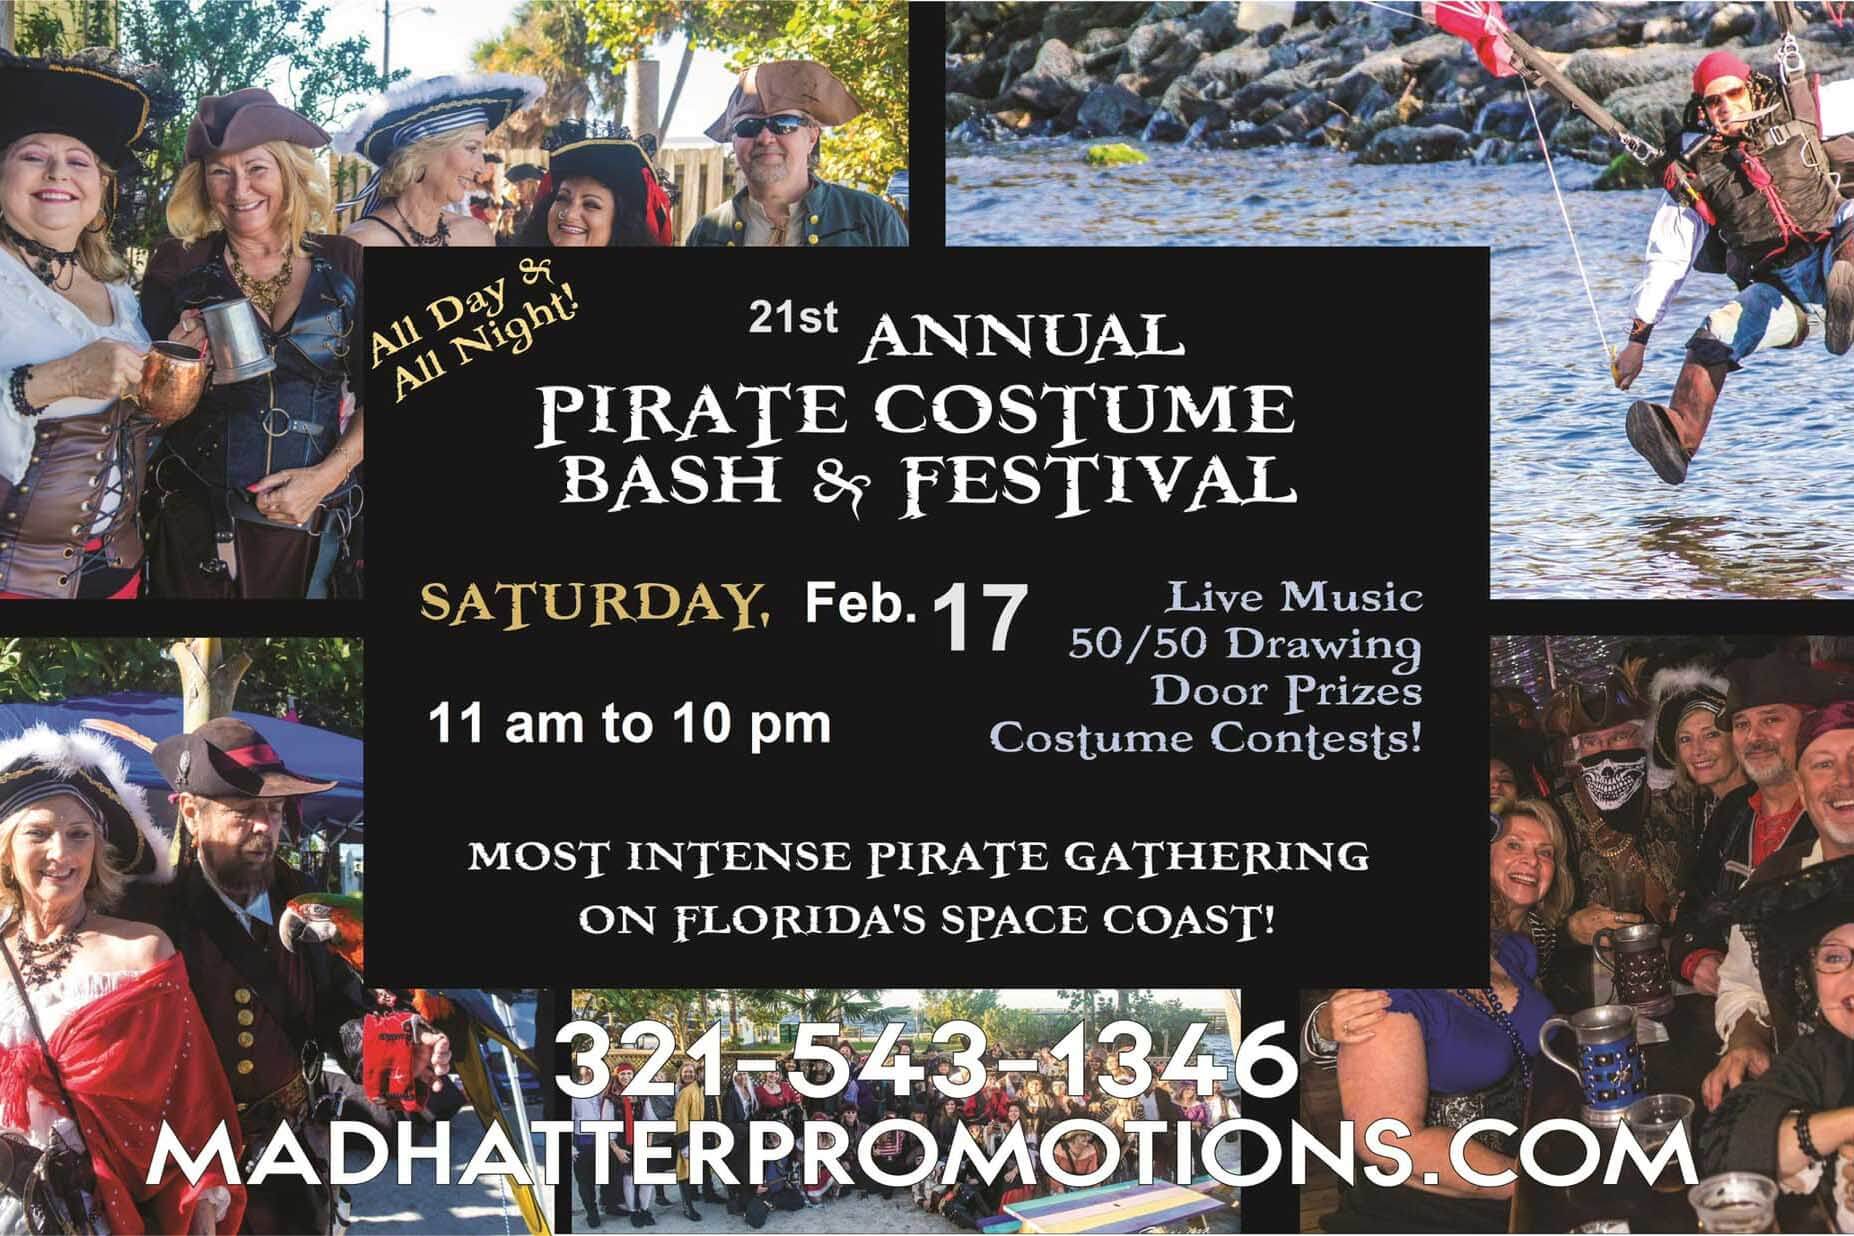 Pirate Costume Bash and Festival Promotional Flyer